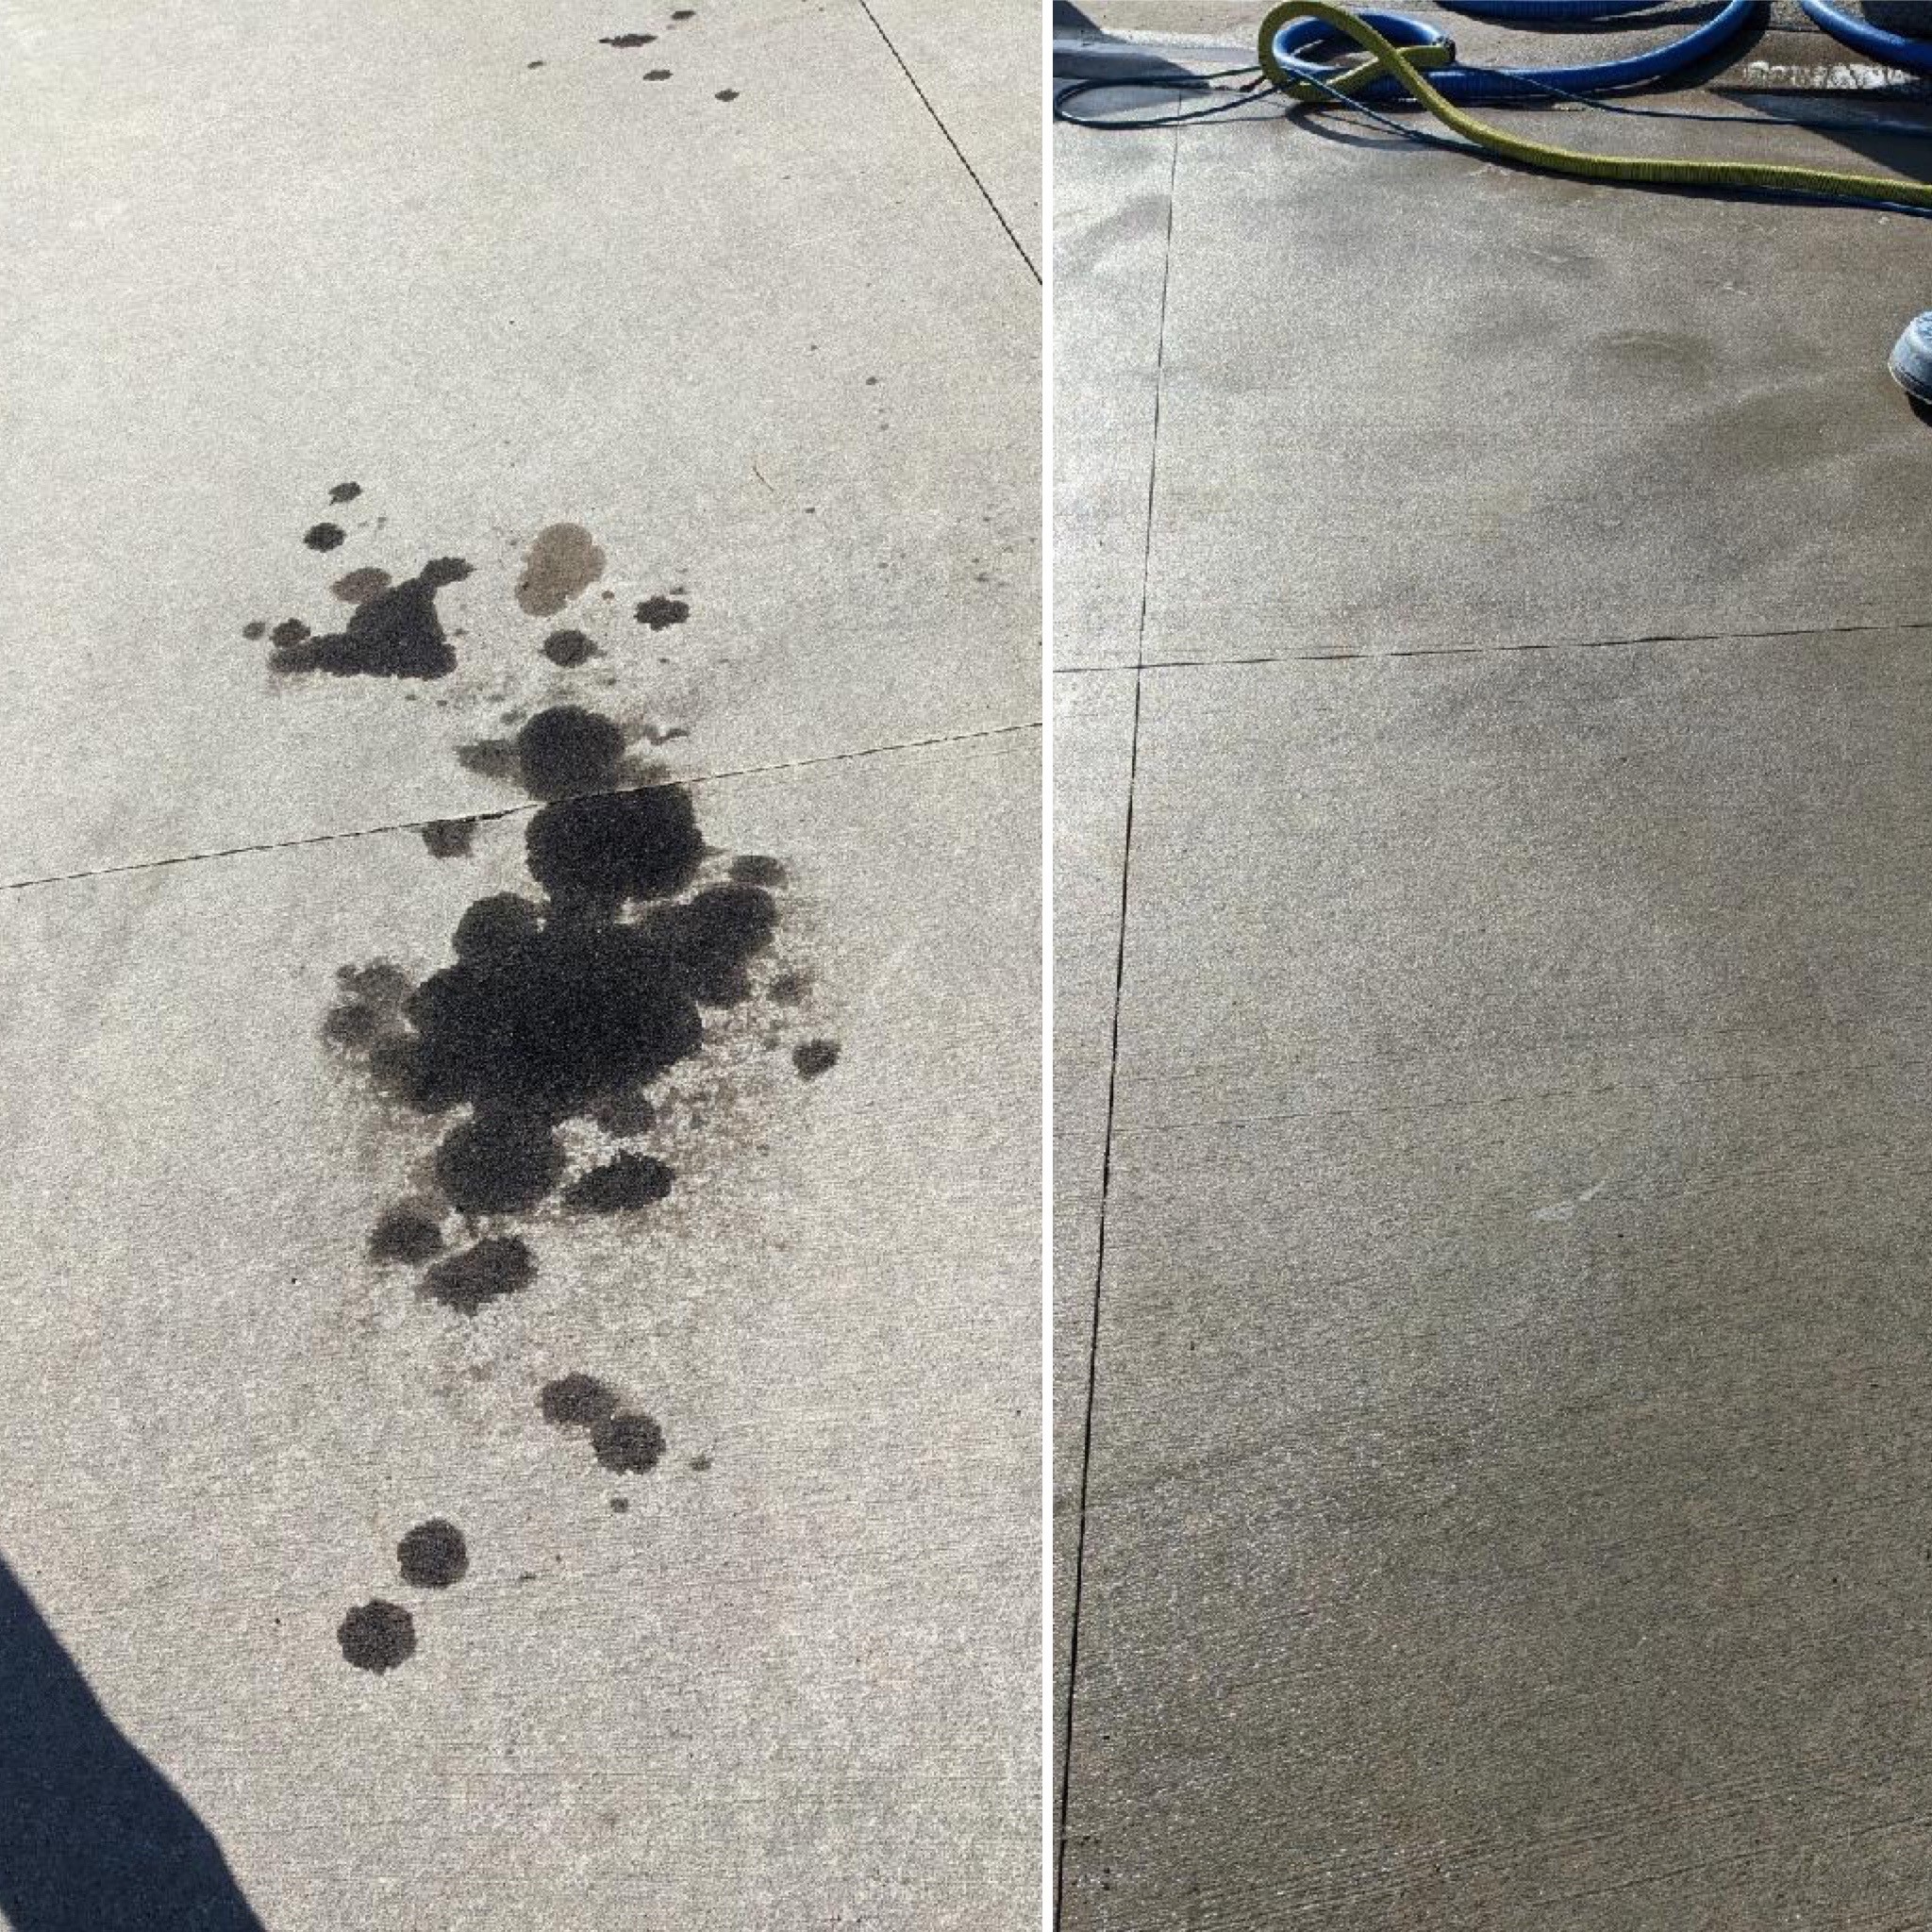 Grease removed from concrete floor